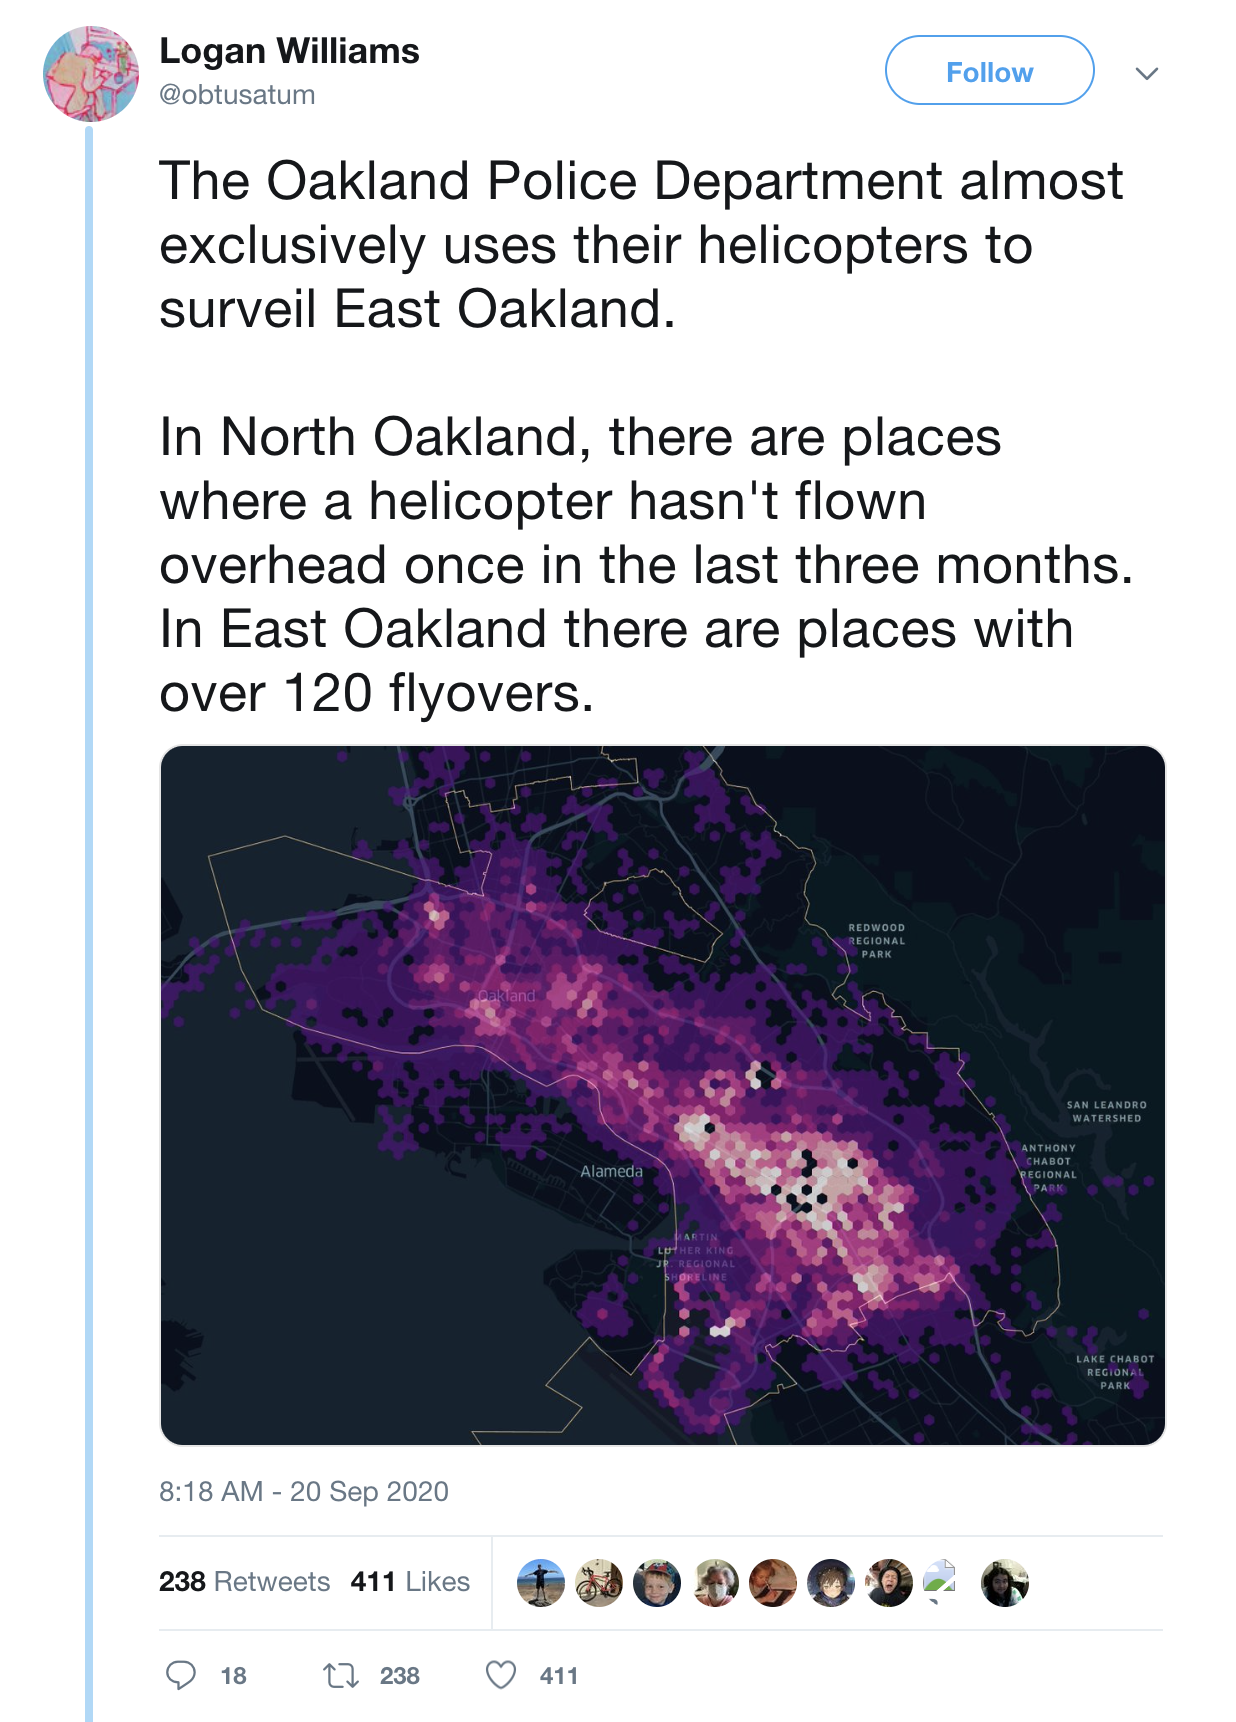 a screenshot of a tweet showing geographic inequity in use of police helicopters in Oakland, California